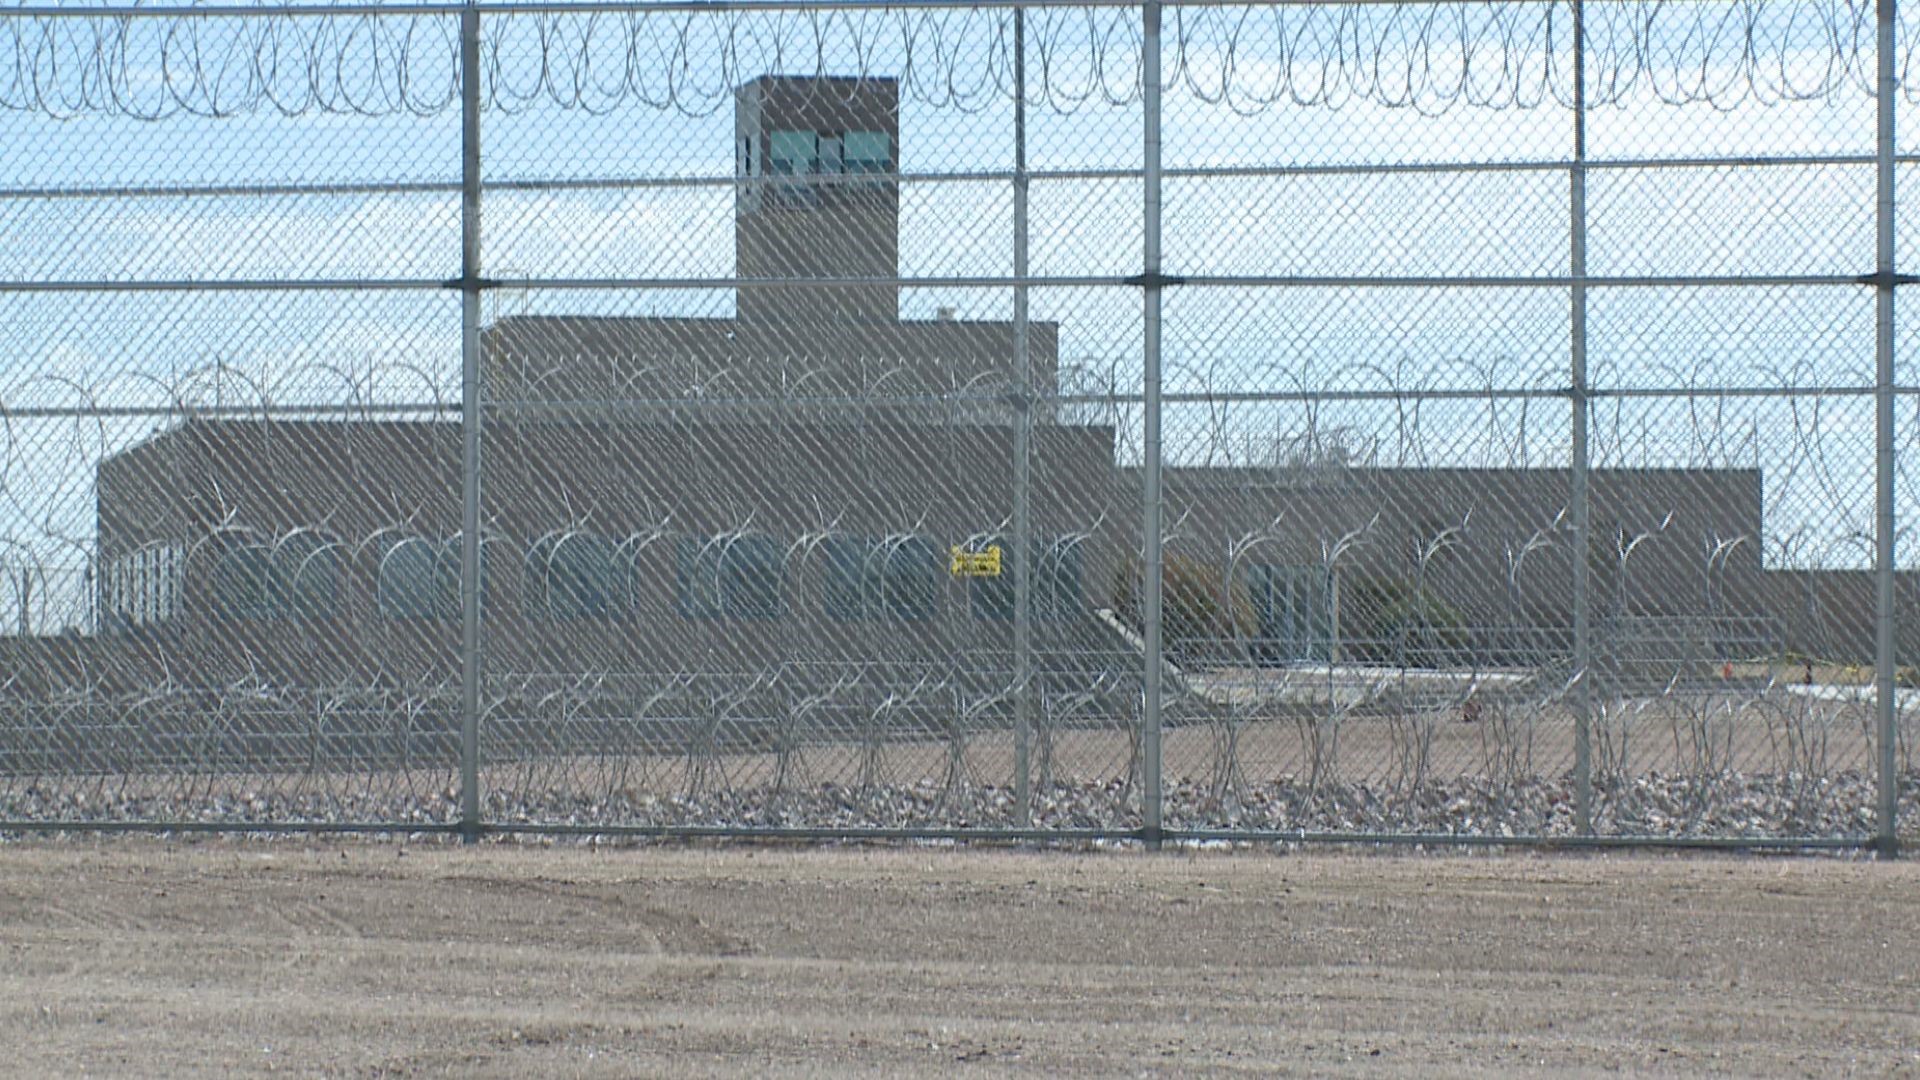 The CDOC wants to re-open a prison originally built for solitary confinement and convert it for use with less violent inmates.